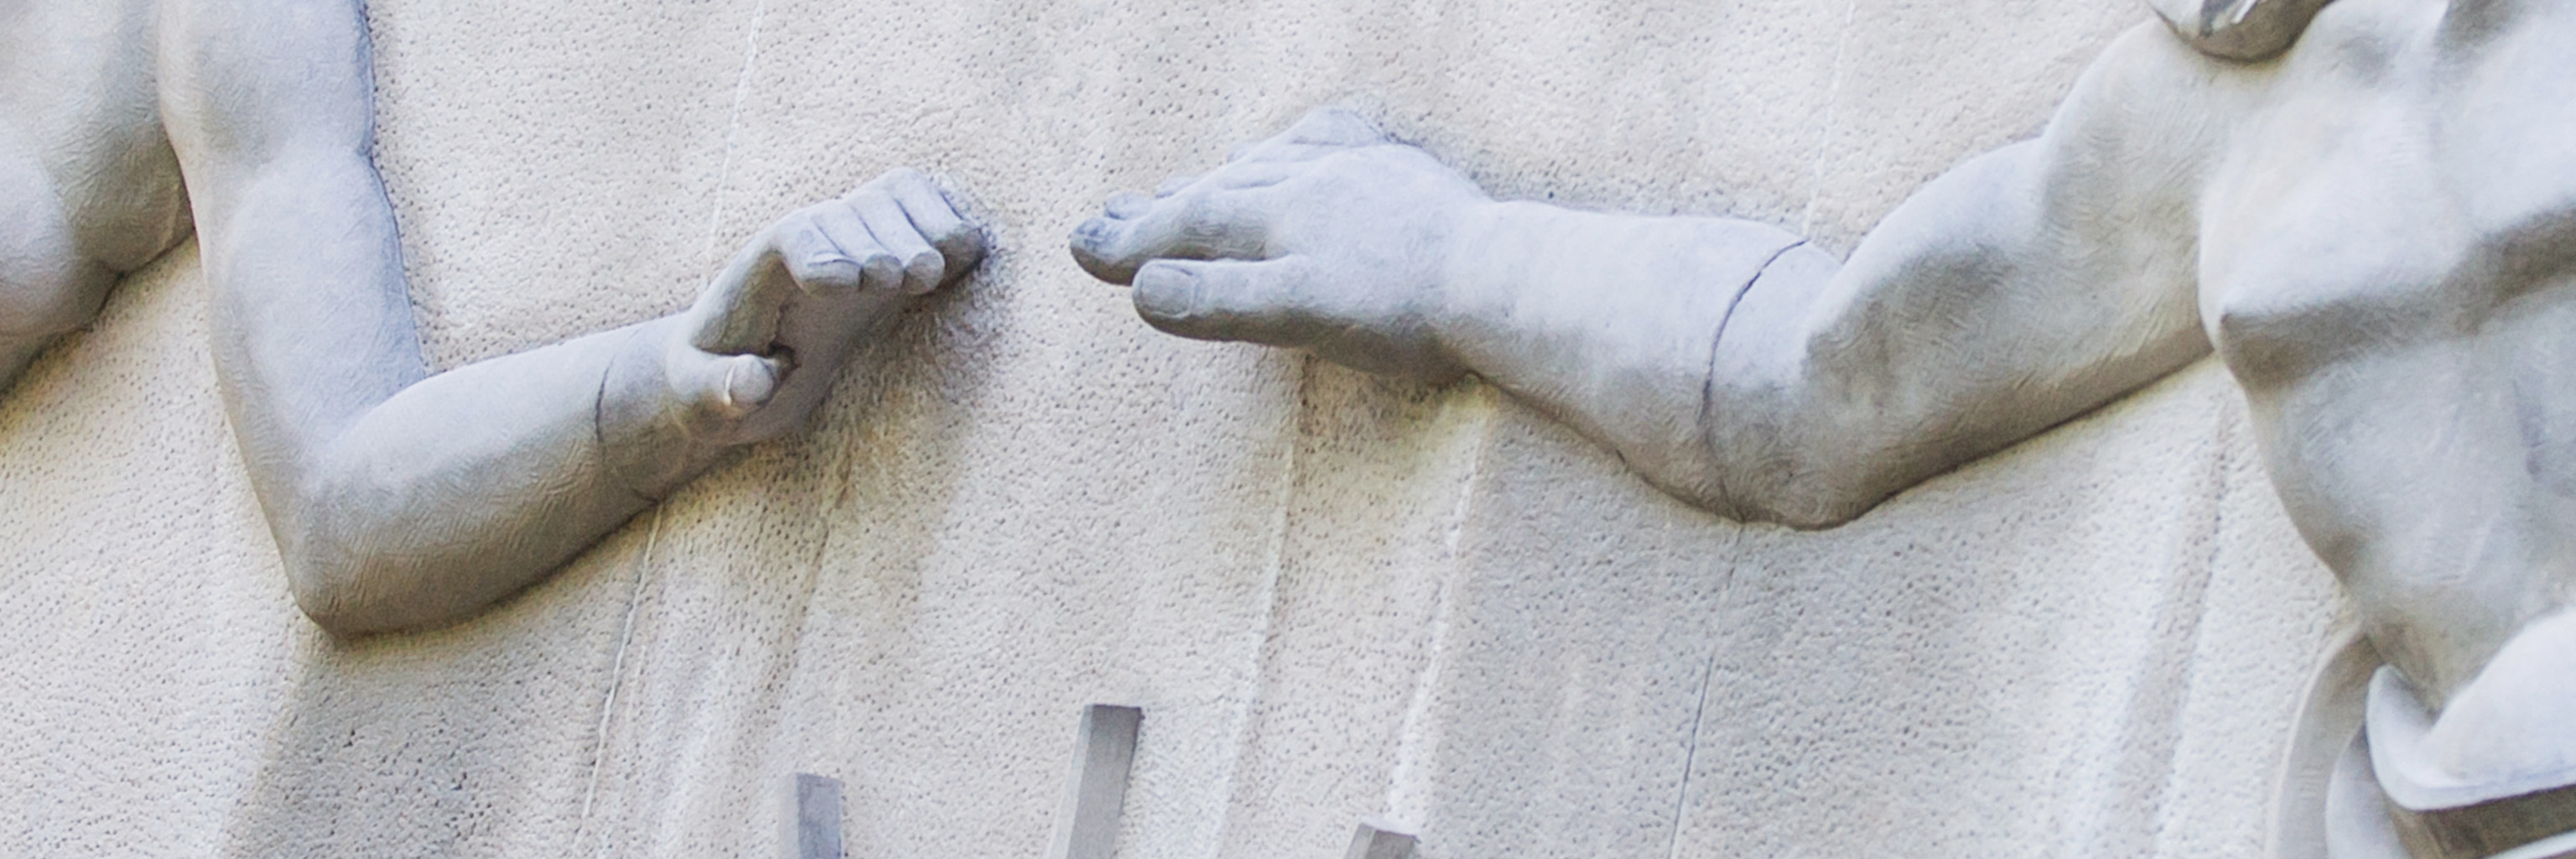 Limestone relief sculpture of two hands reaching for each other.